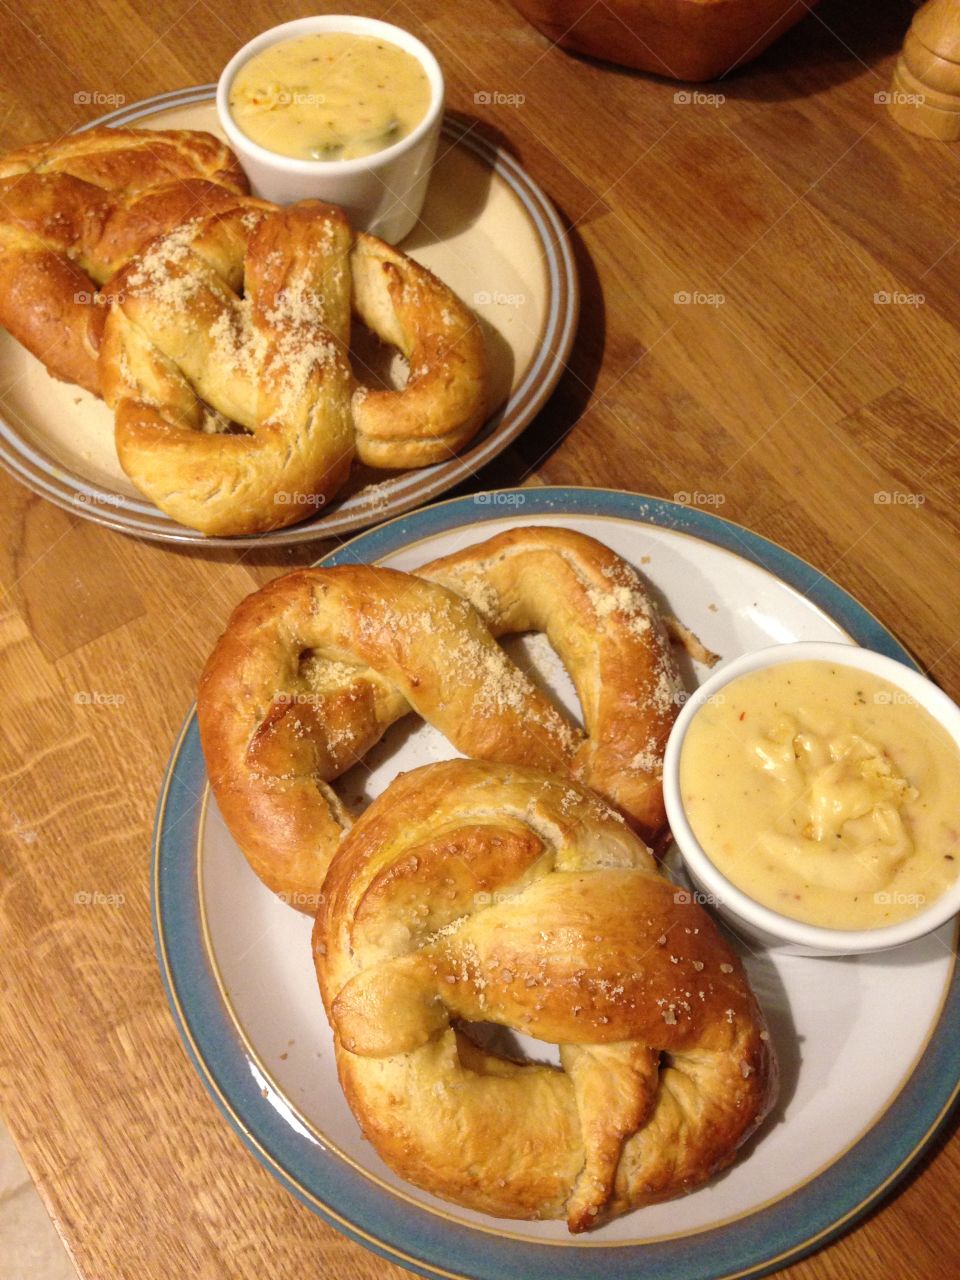 Home made pretzels and cheese dip